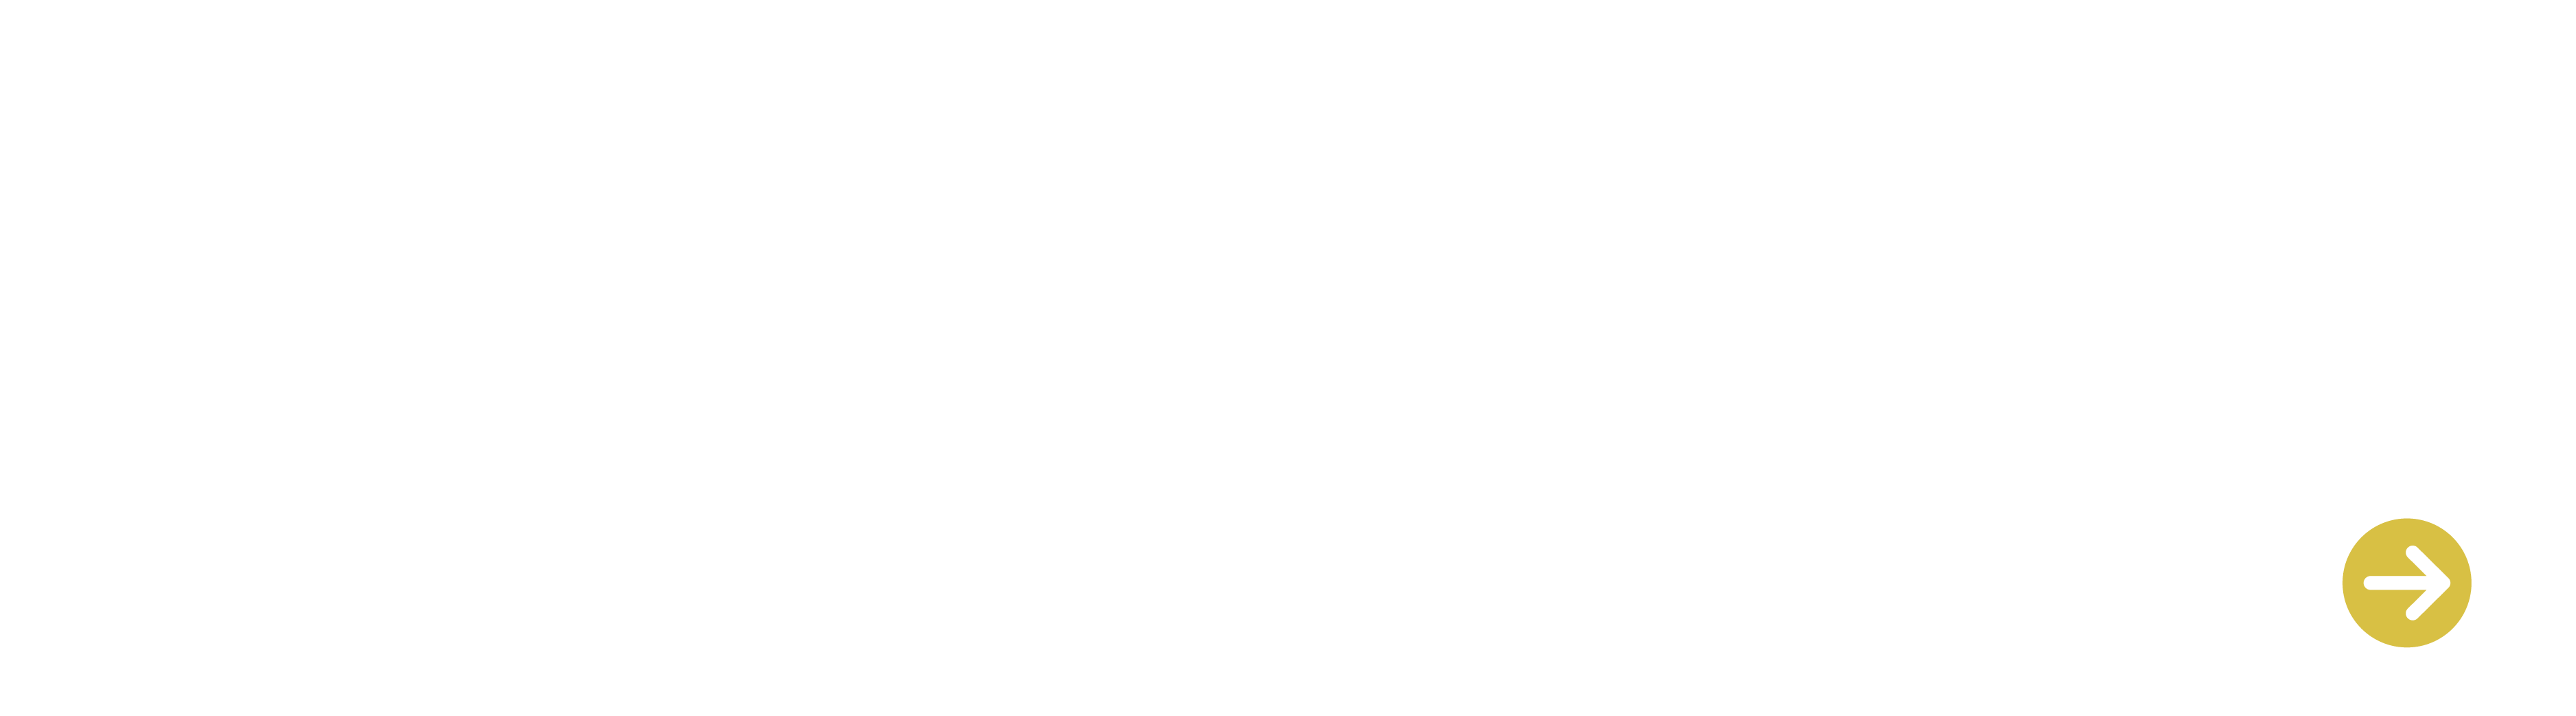 Read about the Tech Proof of Concept